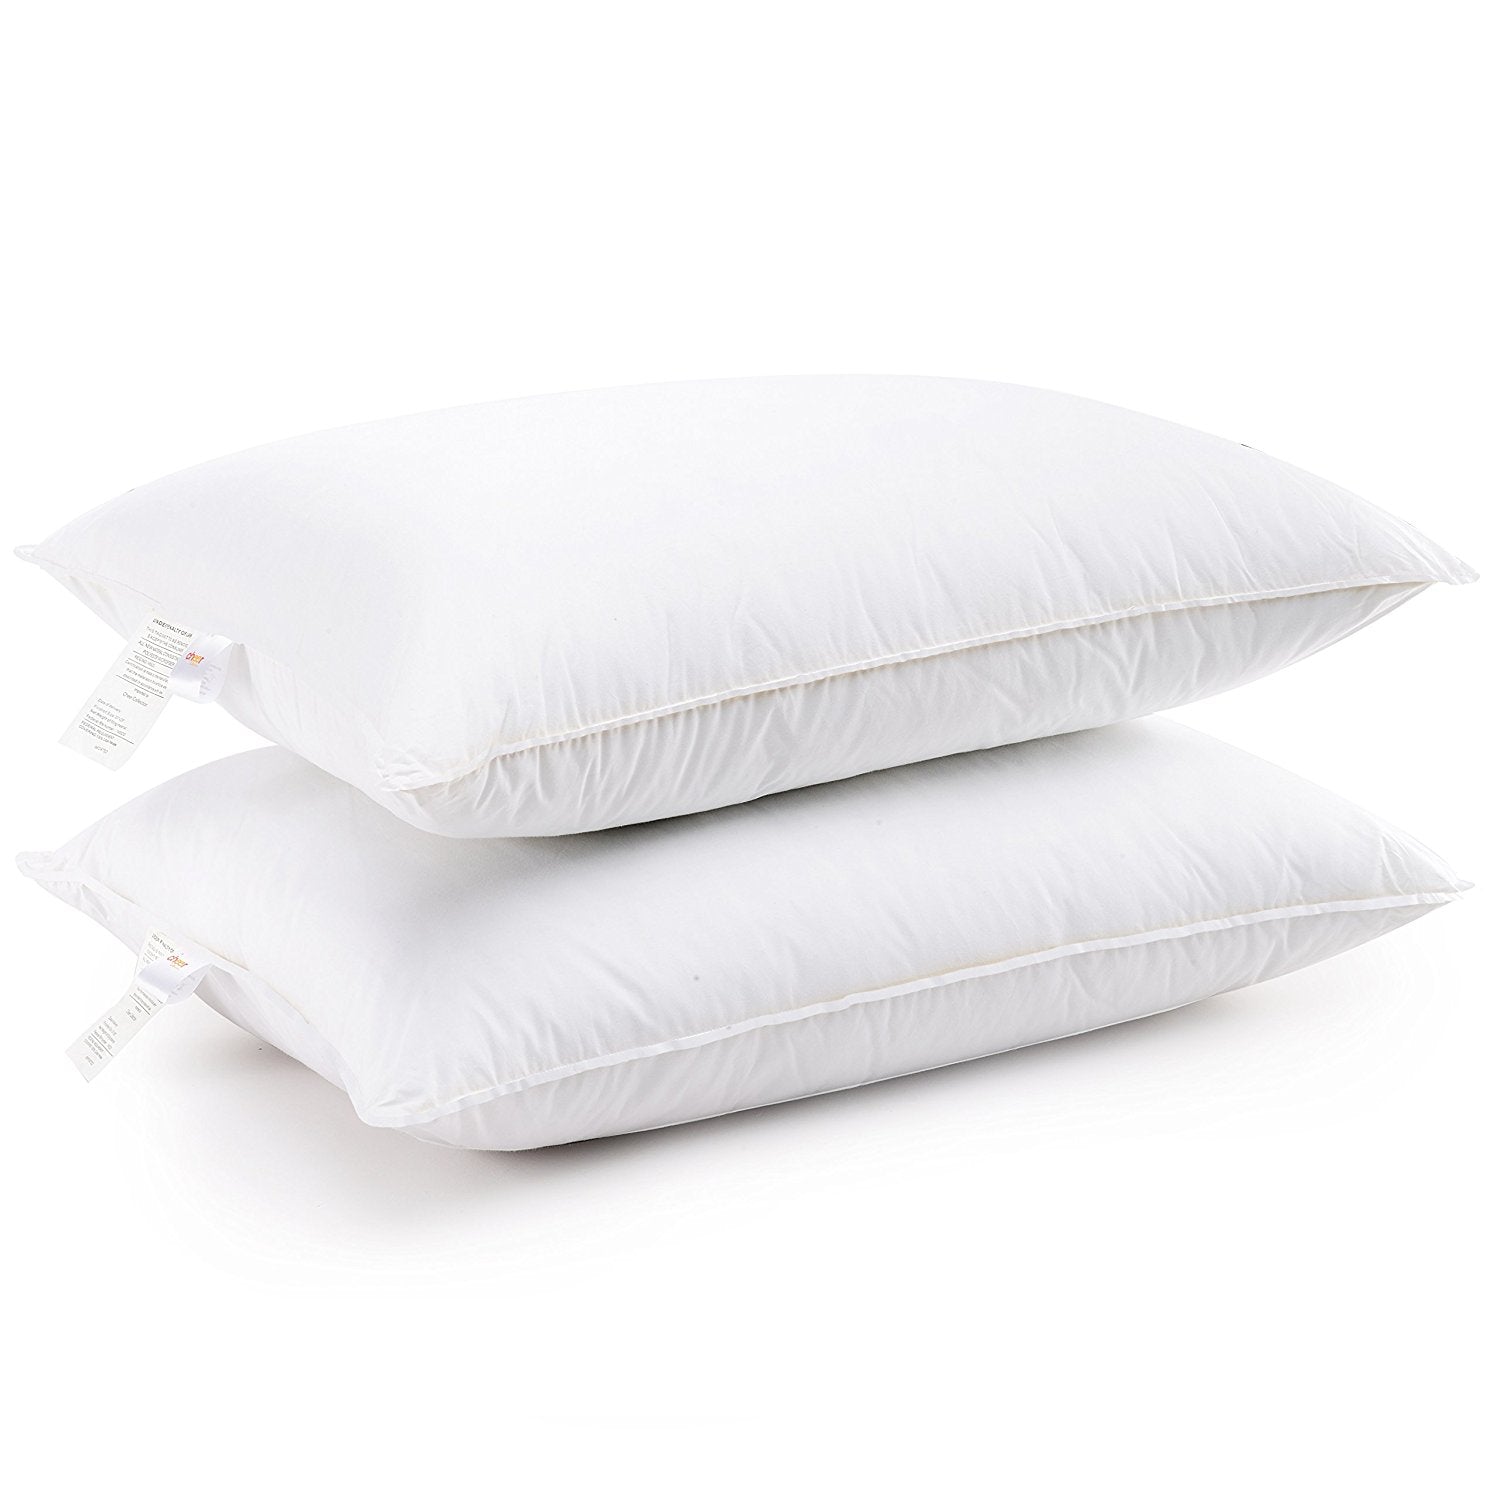 https://cdn.shopify.com/s/files/1/2091/6511/products/cheer-collection-down-alternative-pillows-set-of-4-529175.jpg?v=1671781108